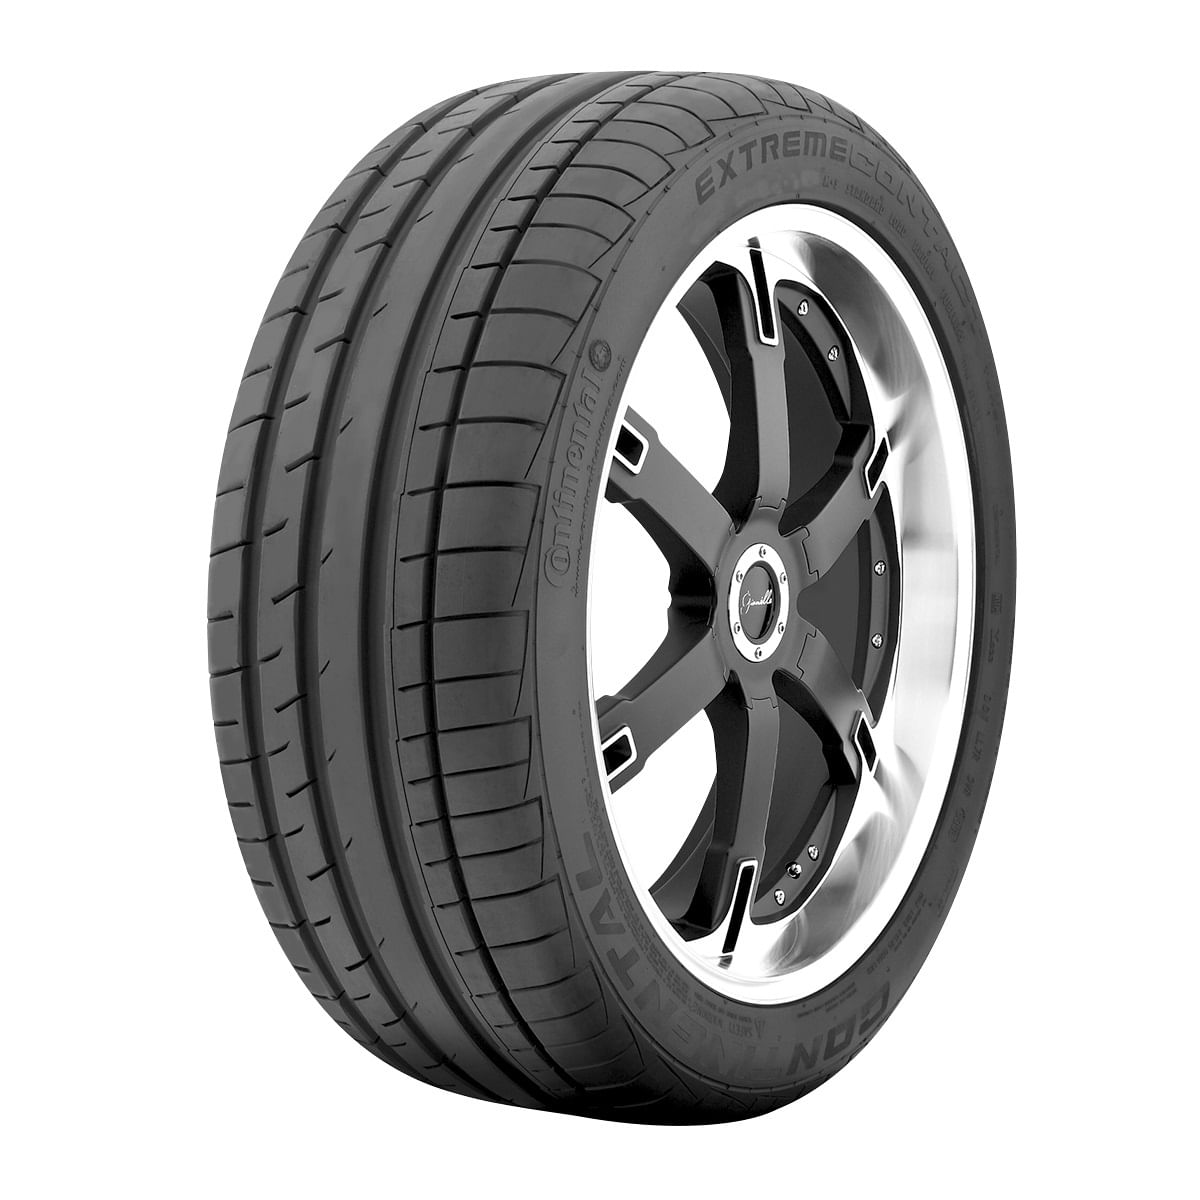 5109574_Pneu Continental Aro 17 215/45R17 Extreme Contact DW_1_Zoom